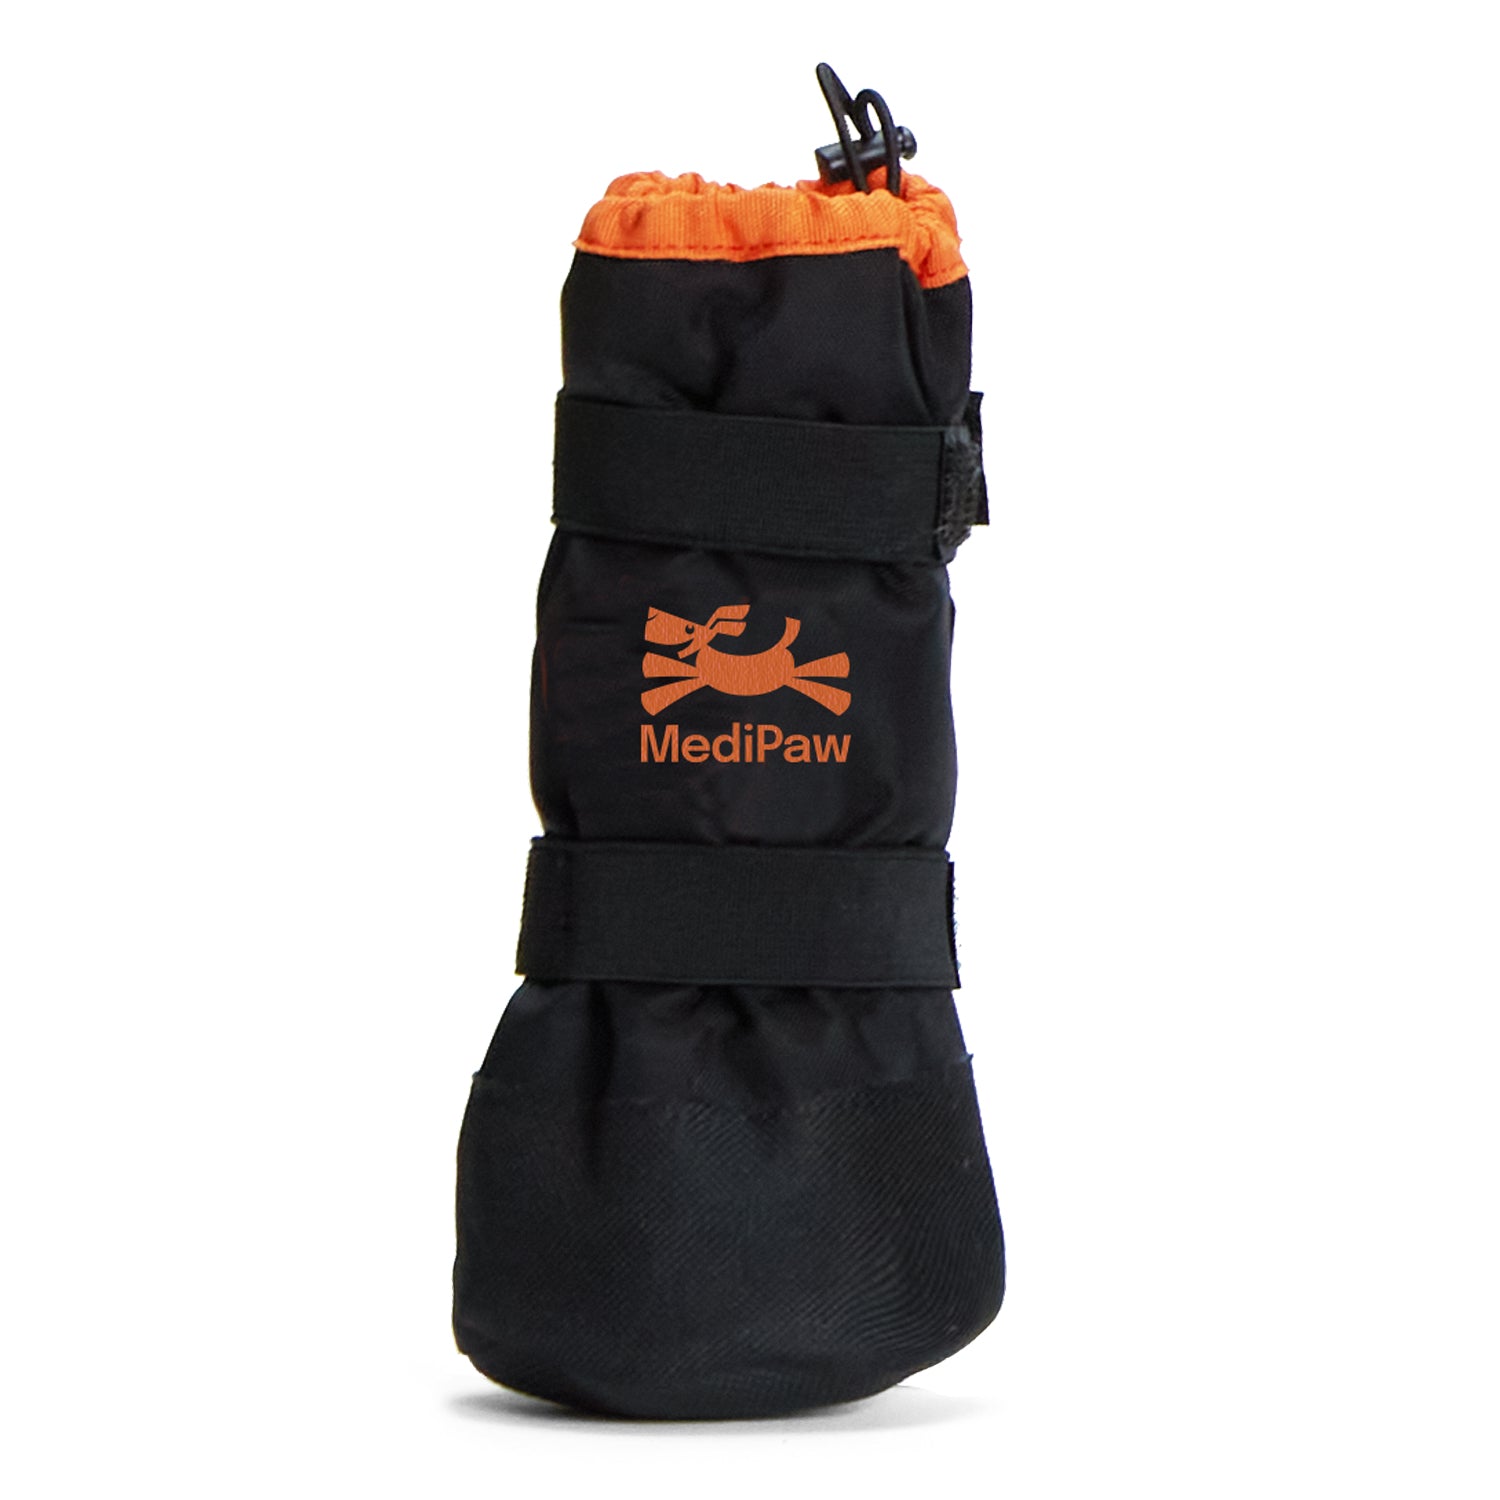 A black and orange dog boot bag designed specifically for MediPaw: Soft Bandage (Basic) Boots from Your Whole Dog.